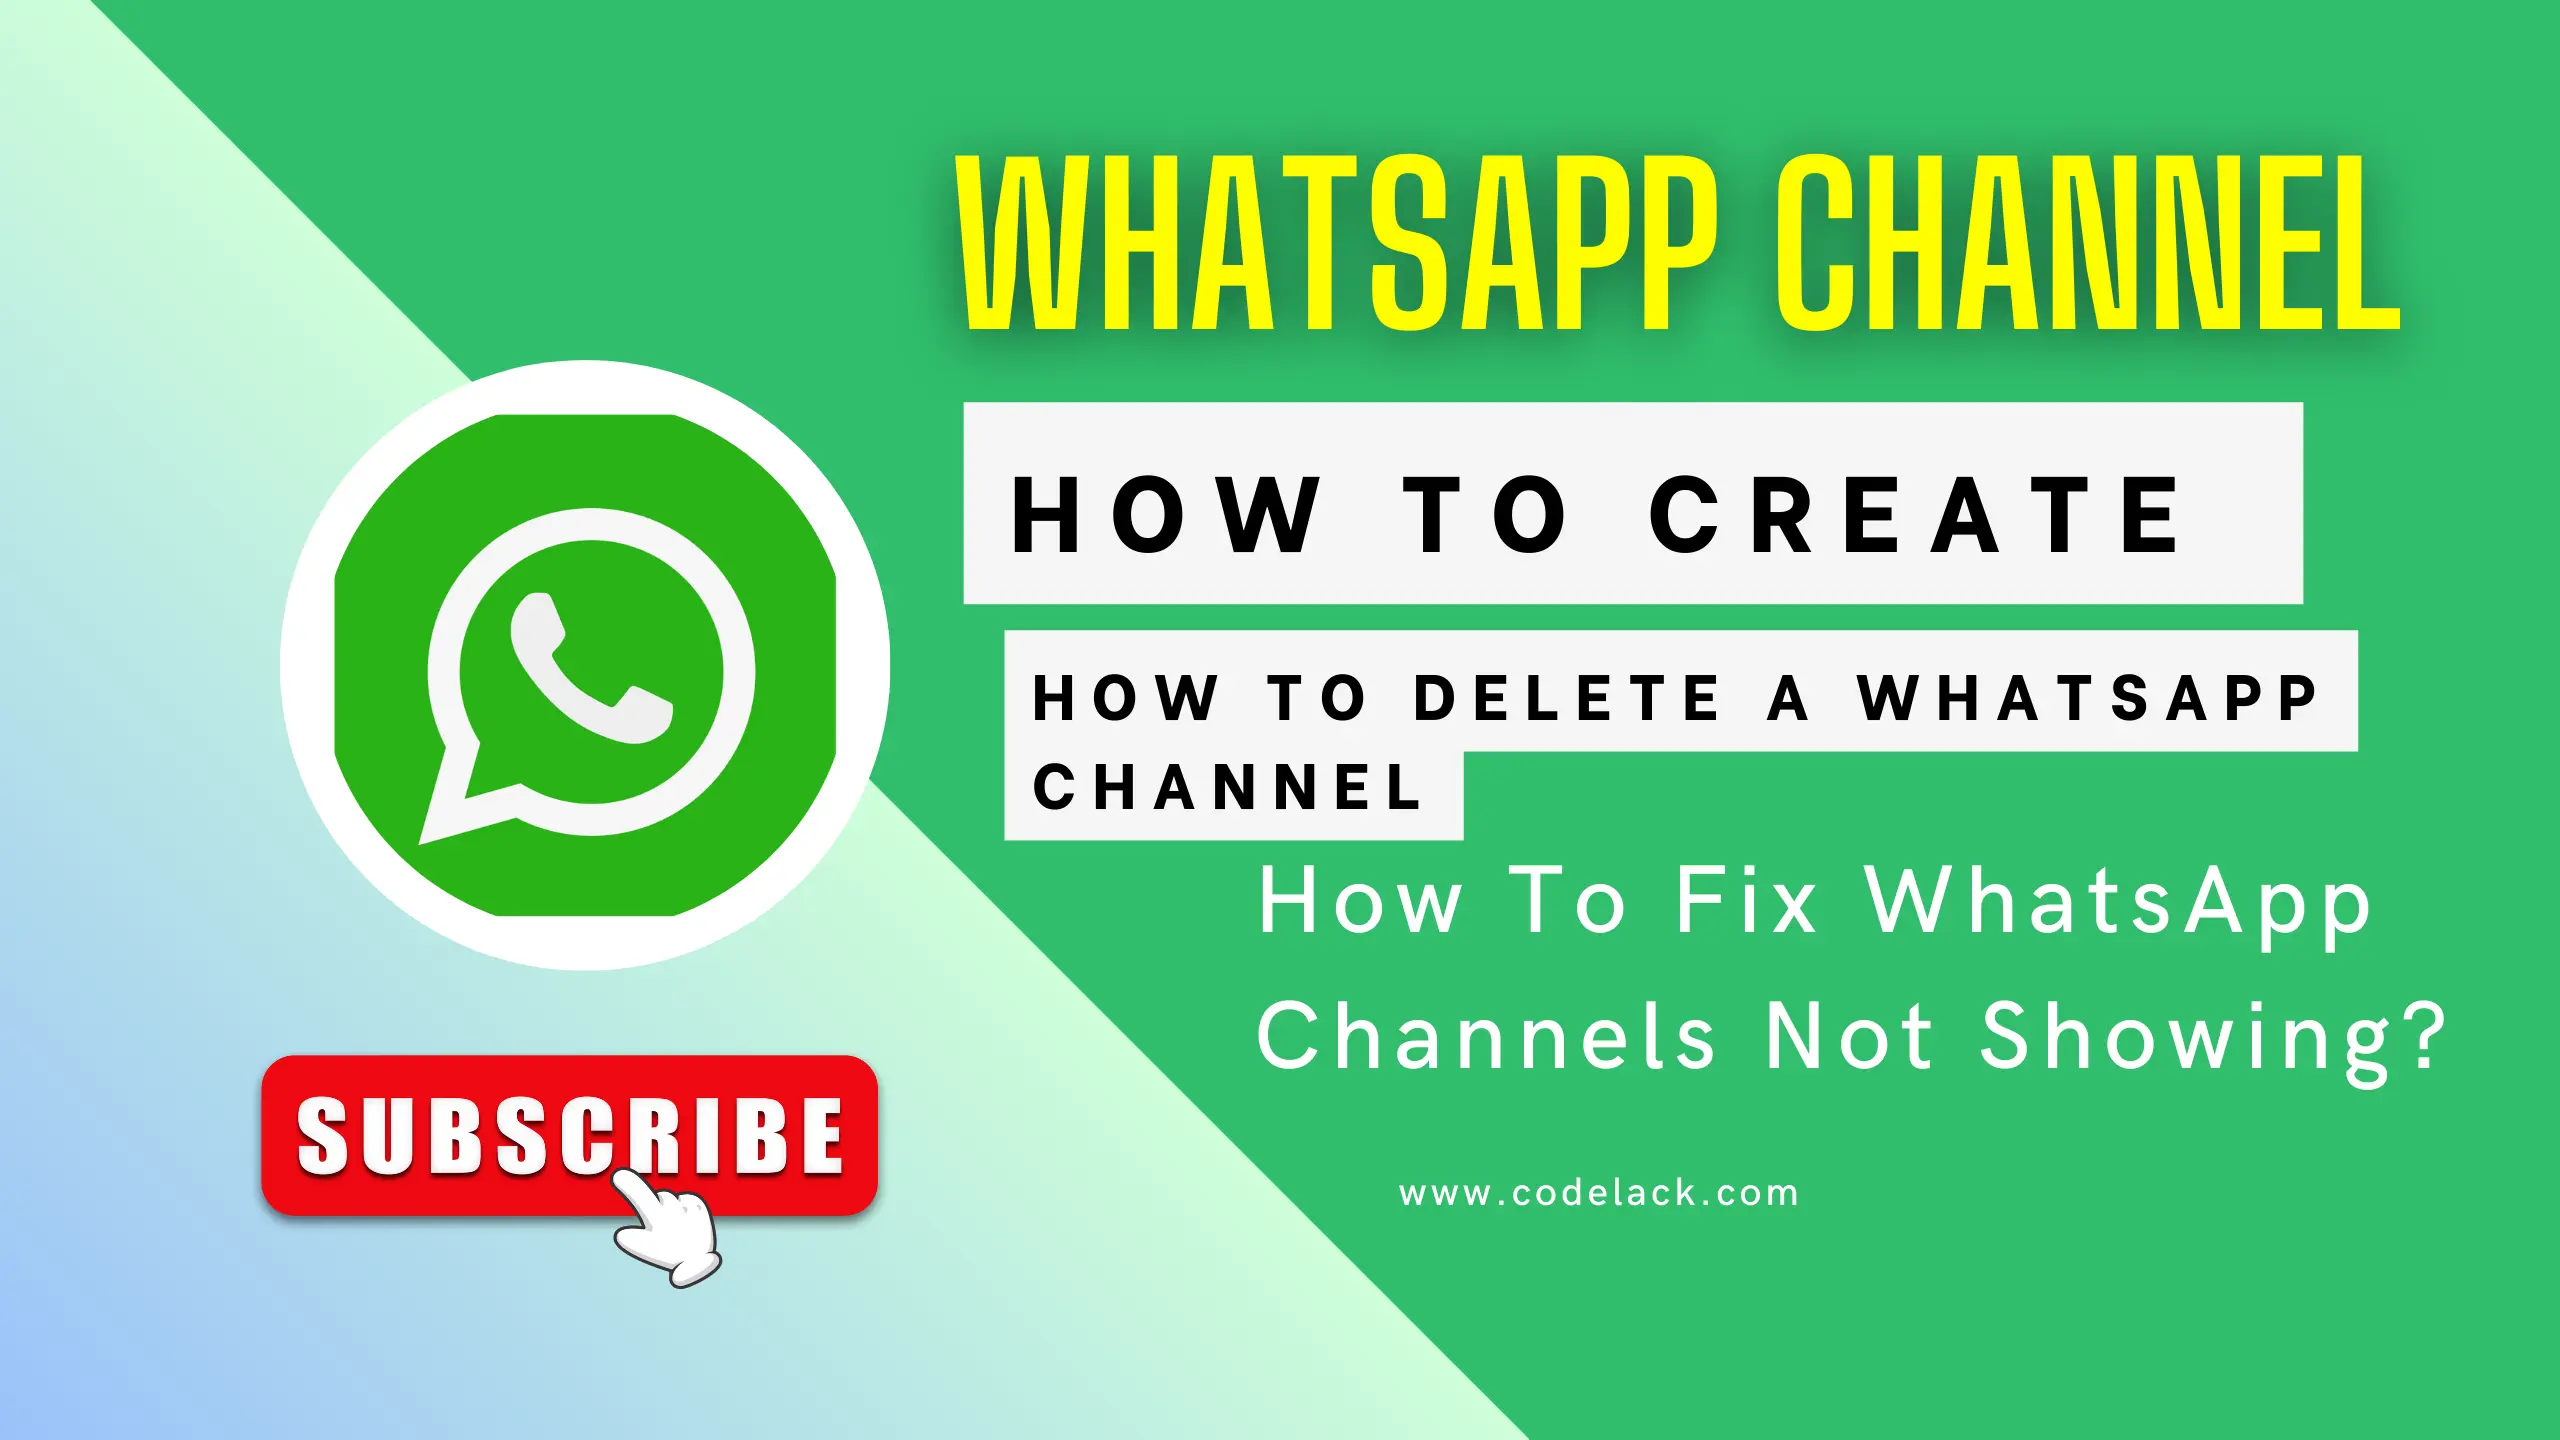 WhatsApp channel how to create